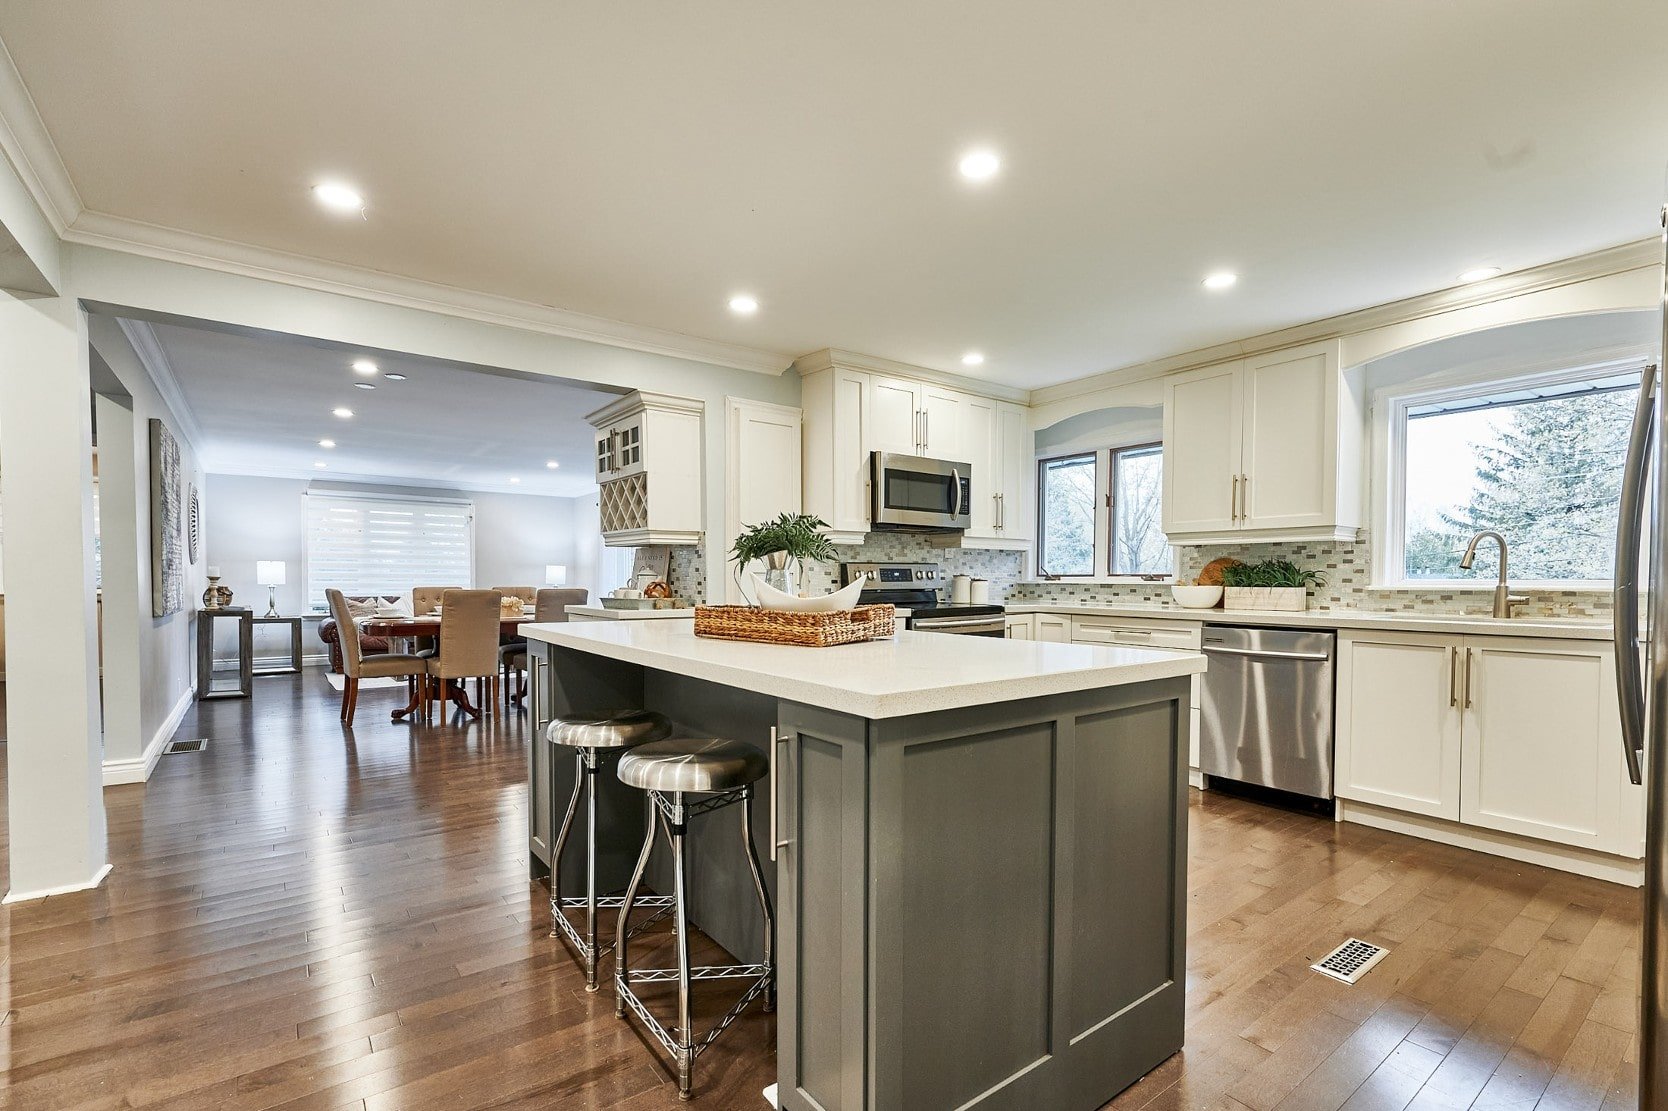 Beautiful kitchen in a home for sale in Pickering, Ontario